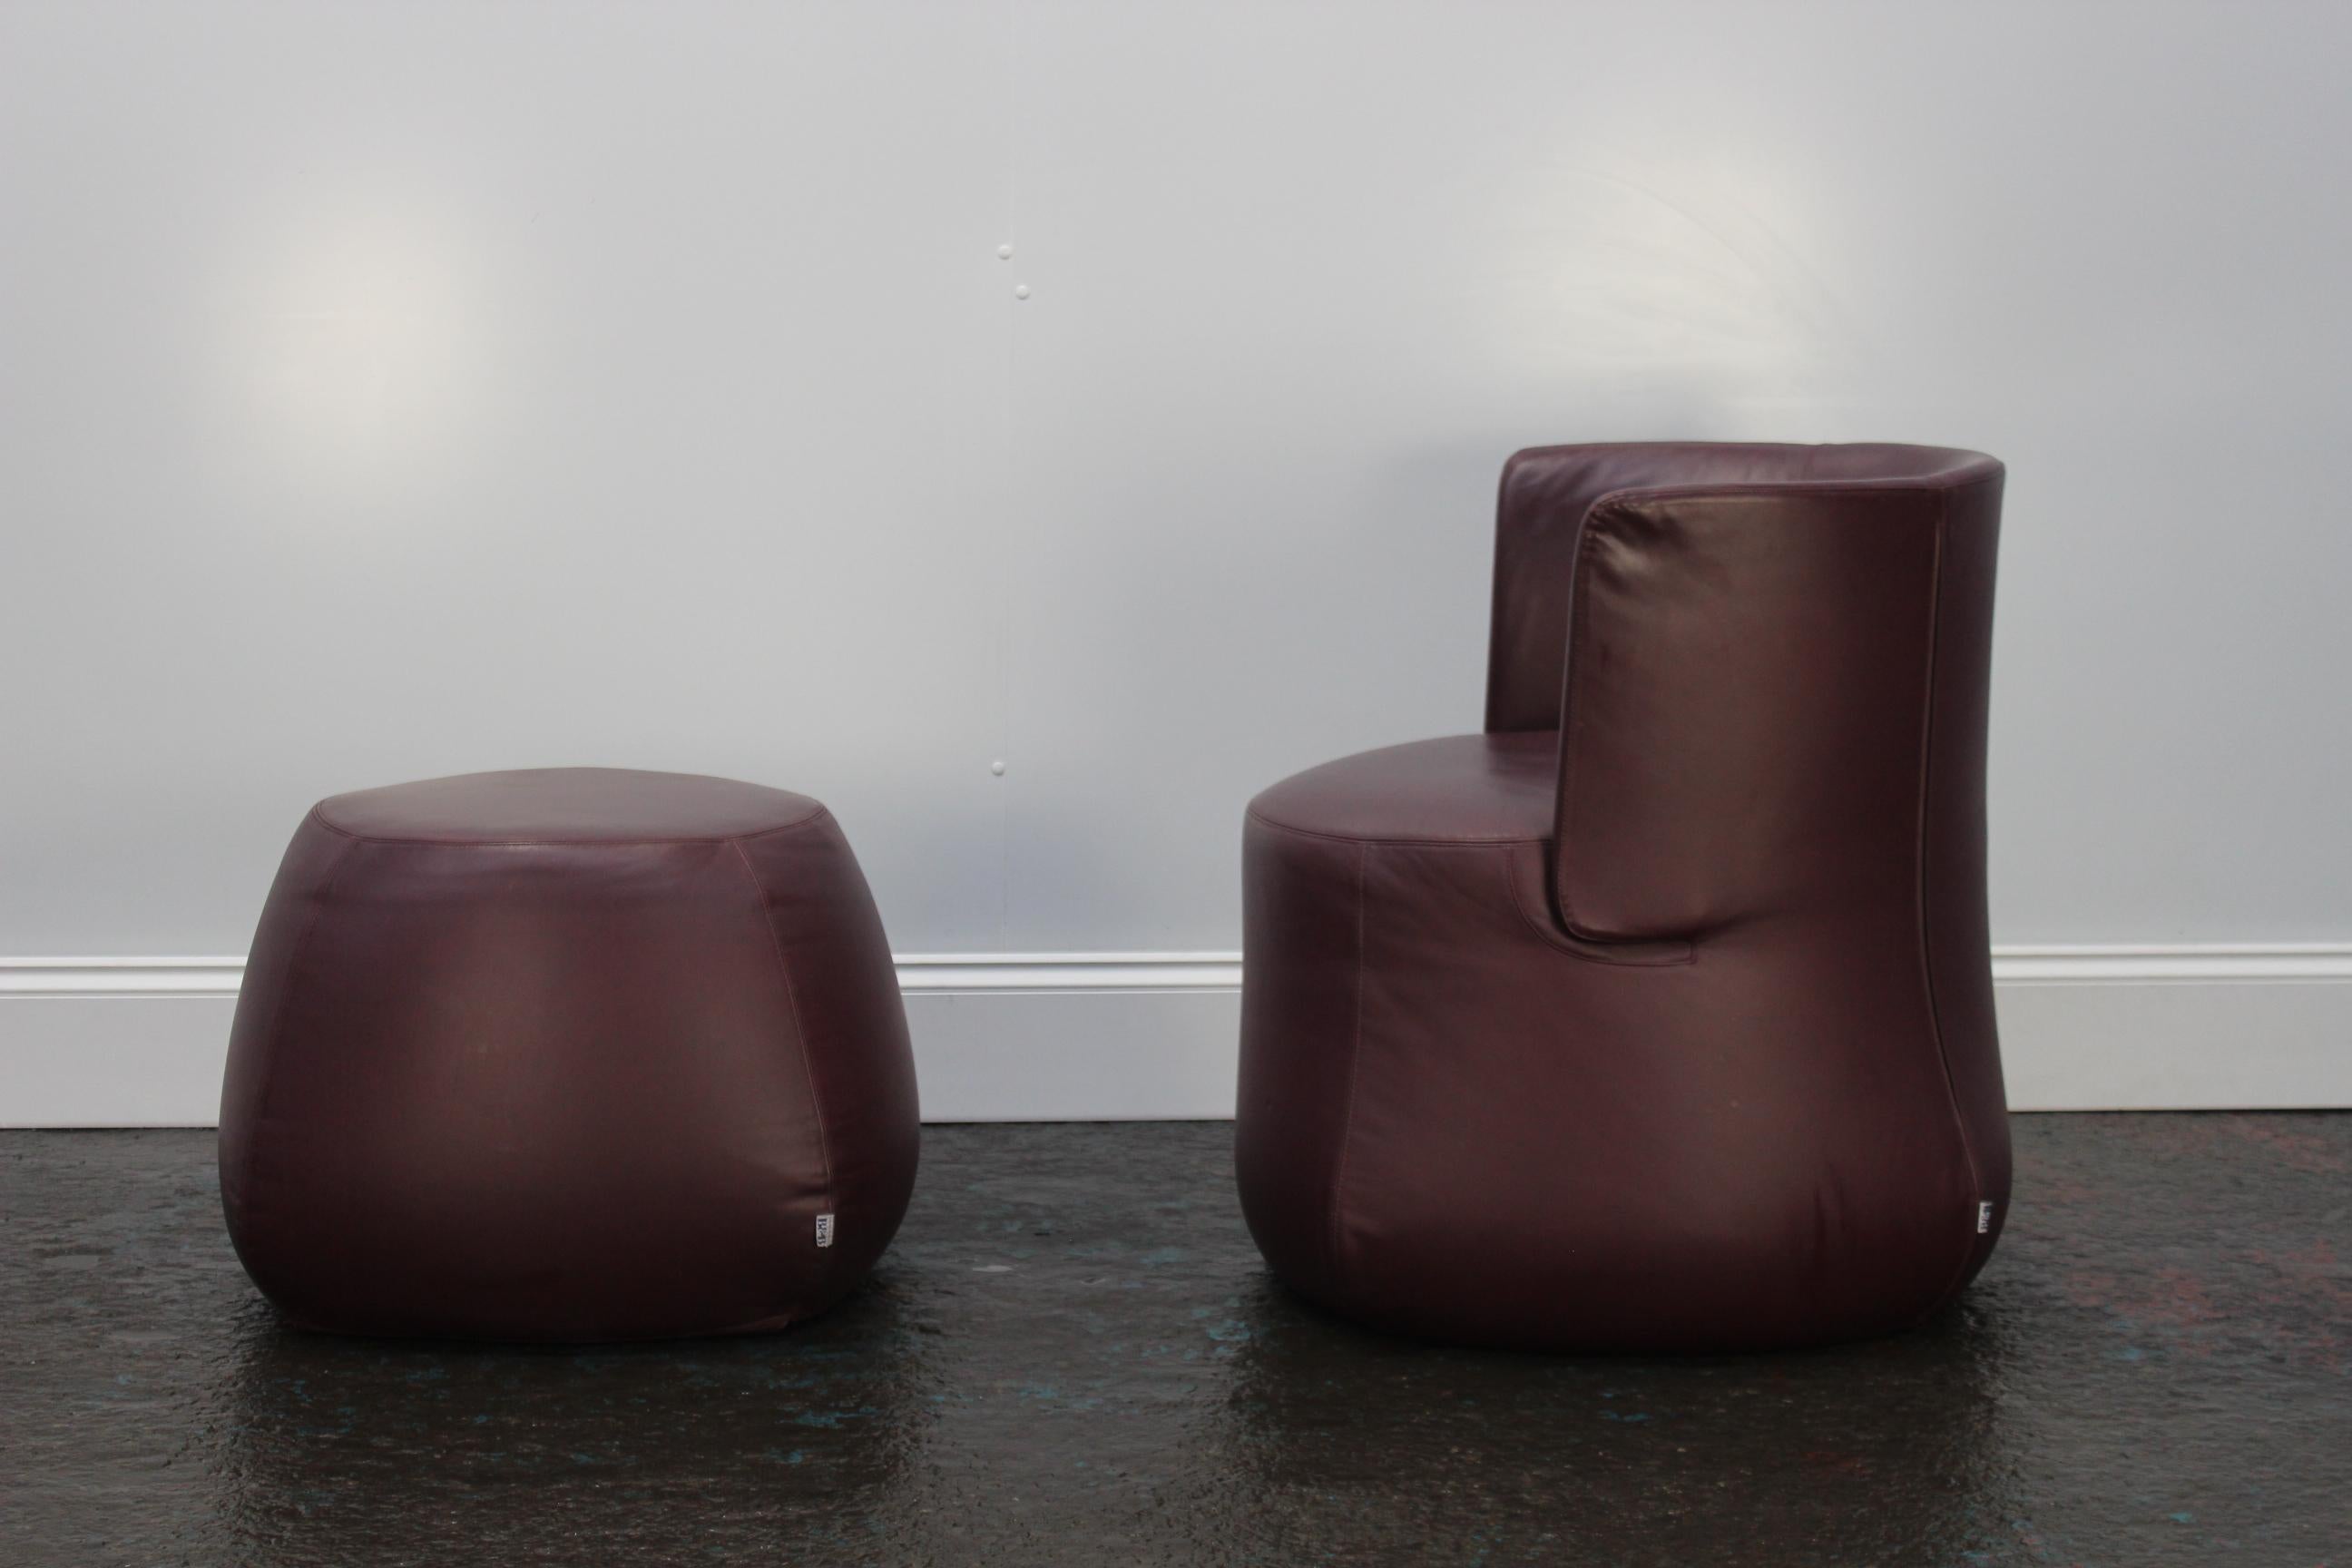 Hand-Crafted B&B Italia “Fat Sofa” Armchair and Pouf in Aubergine Purple “Gamma” Leather